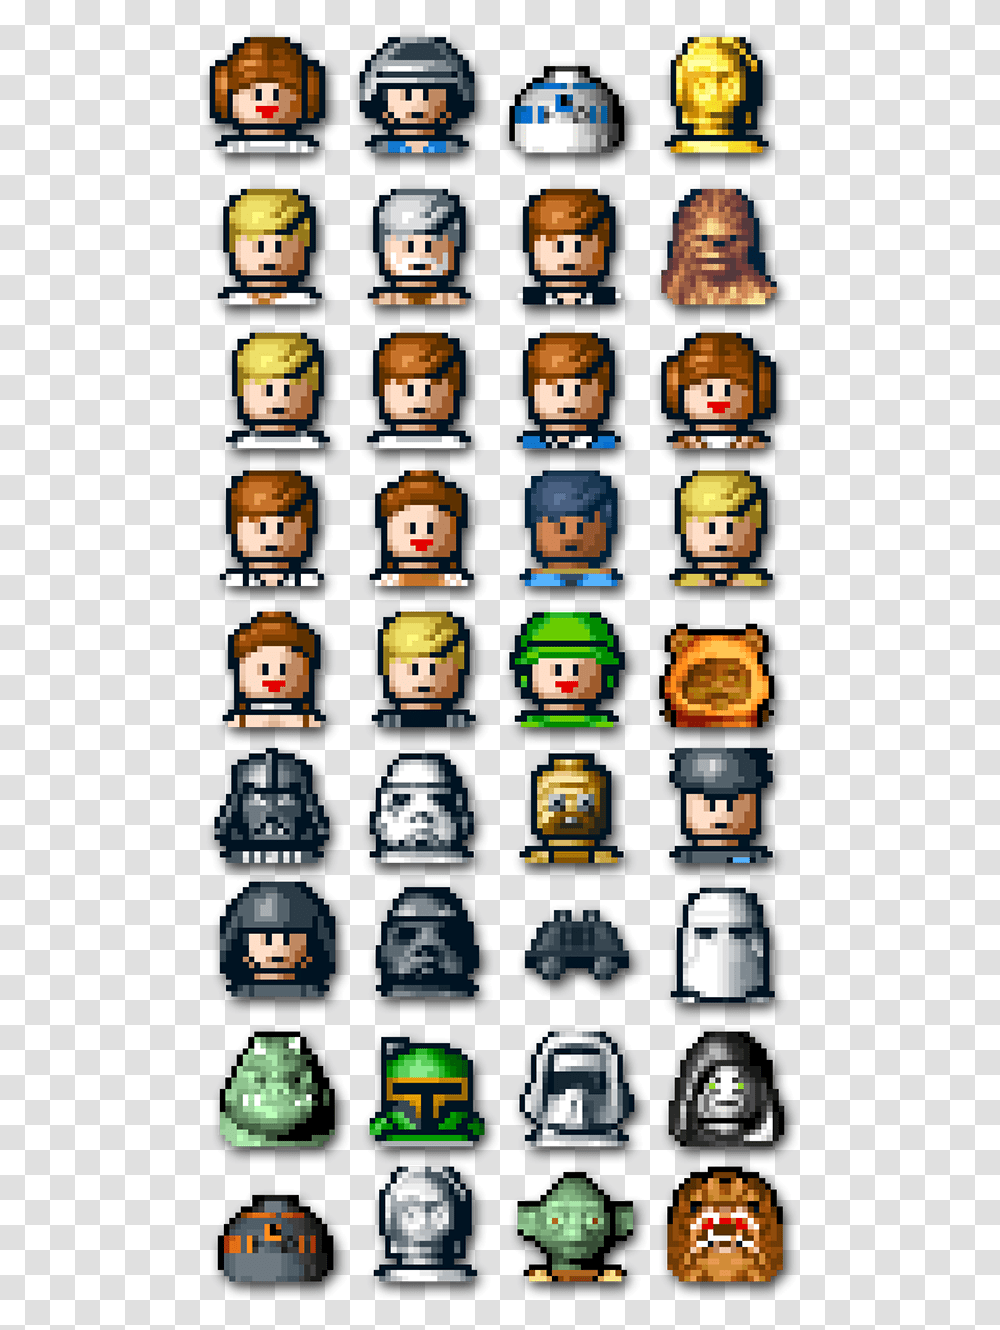 Lego Star Wars Characters Pictures Download Lego Star Wars Ii All Characters, Urban, Metropolis, City Transparent Png